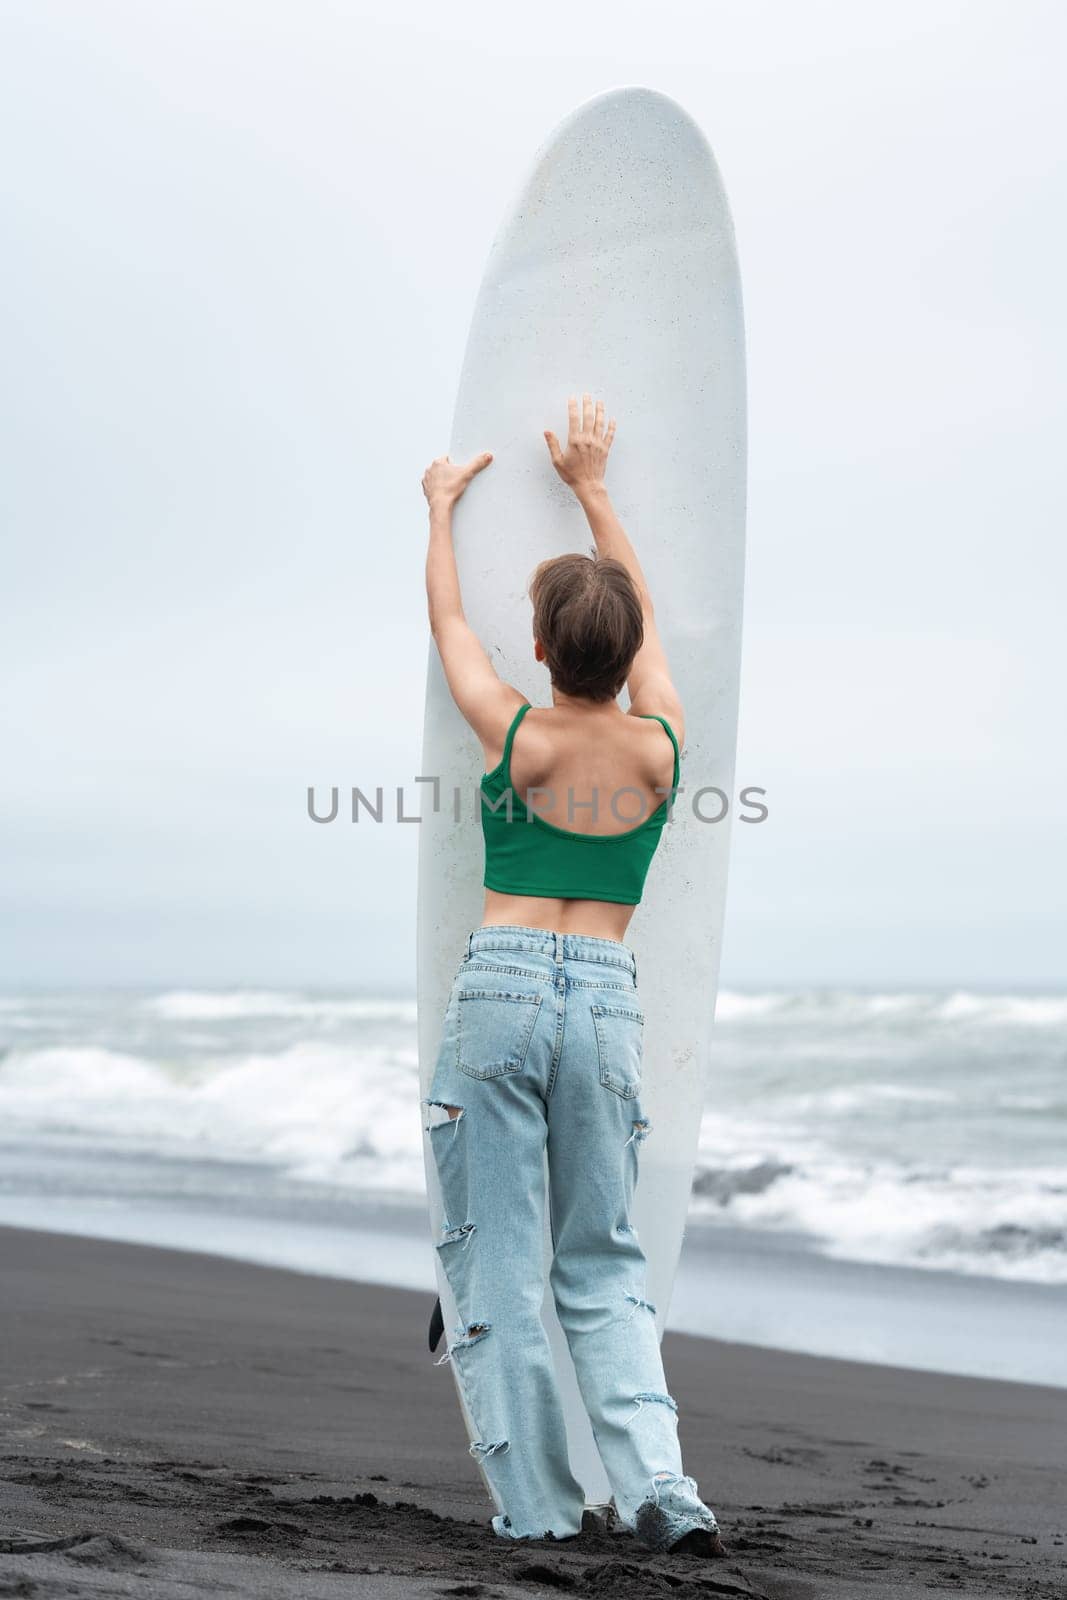 Rear view of woman surfer arms raised holding surfboard vertically, standing on sandy beach, posing by Alexander-Piragis